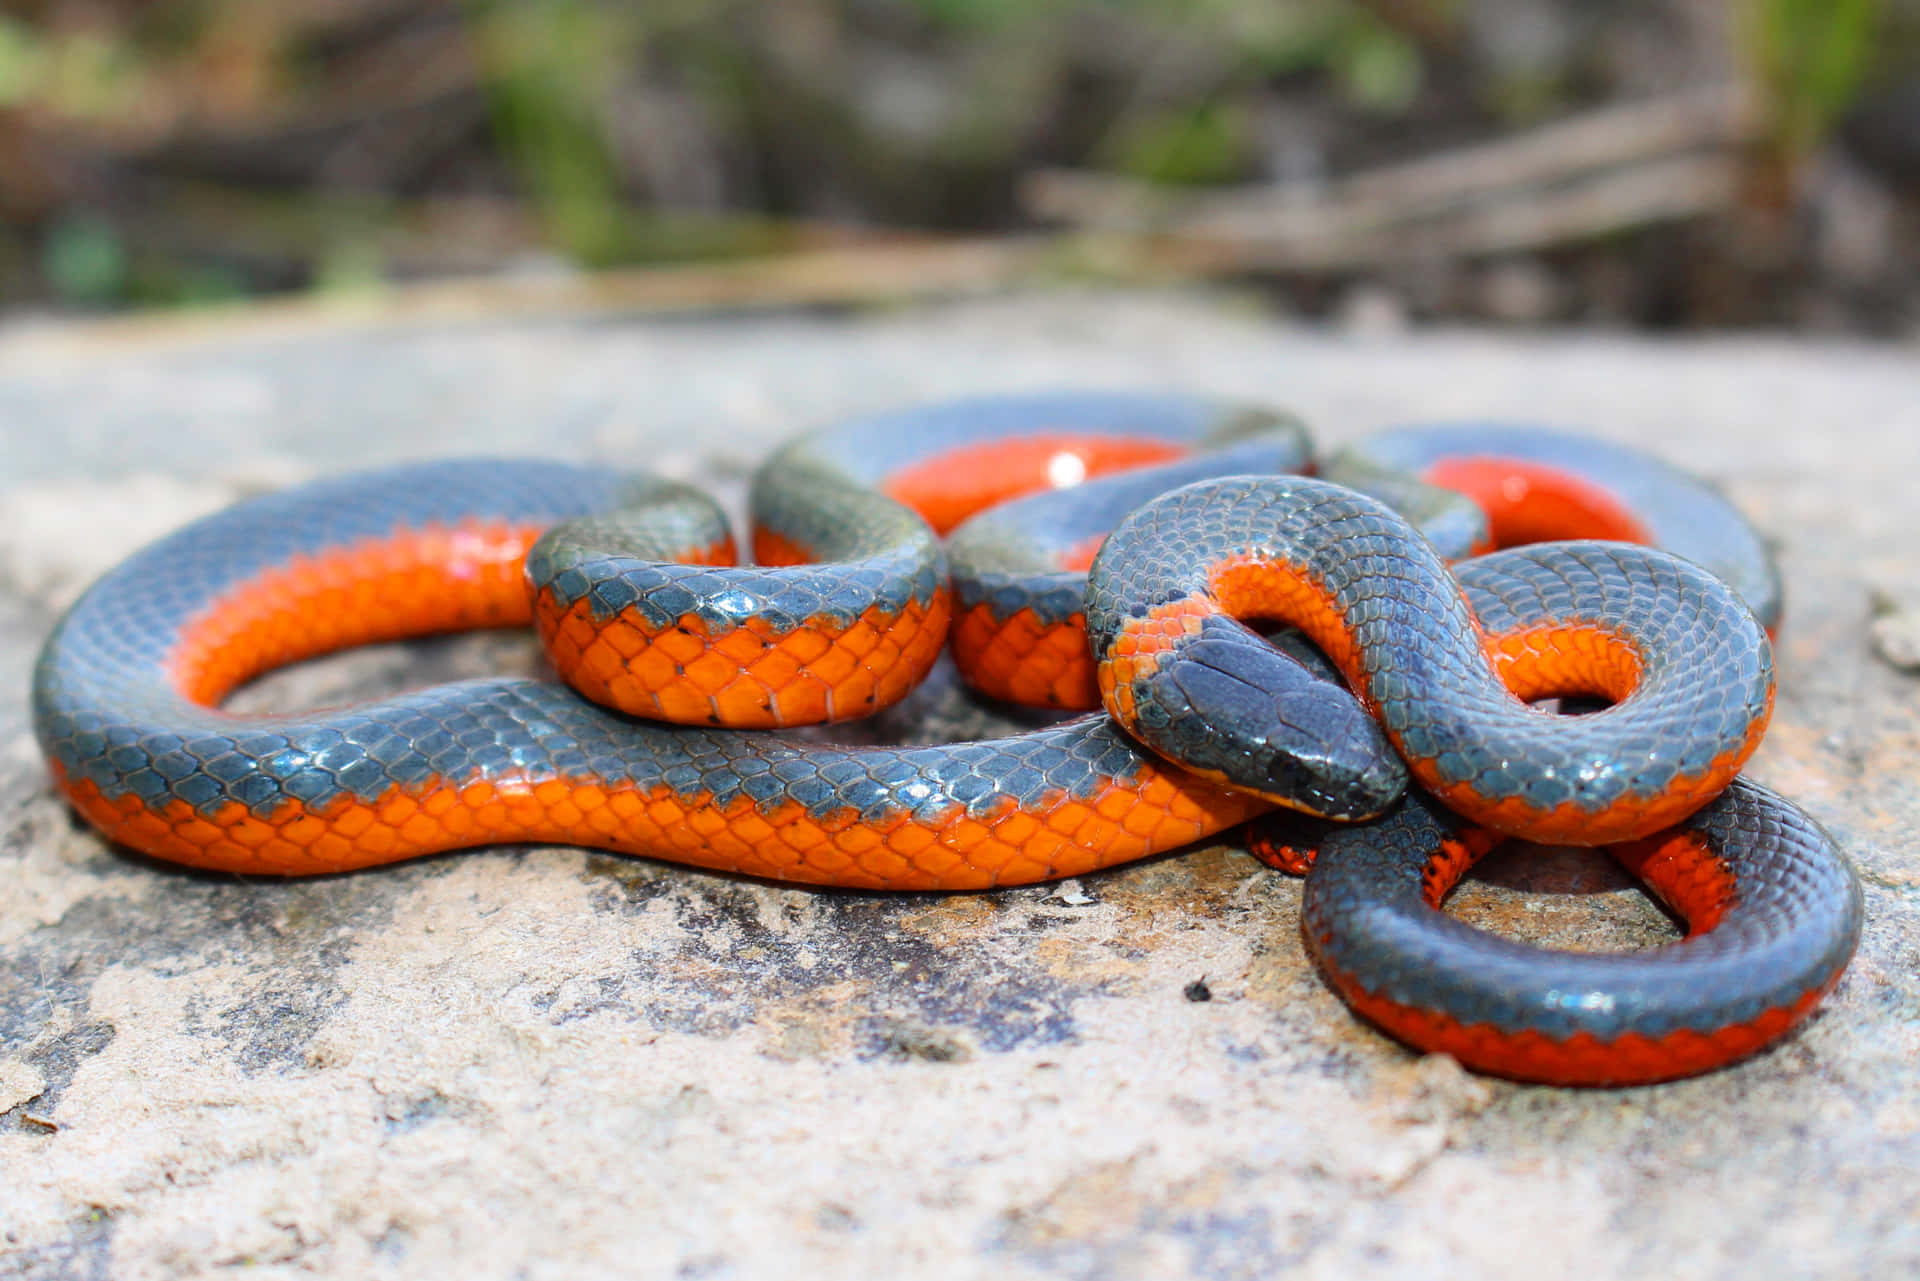 Michigan's diverse array of snakes